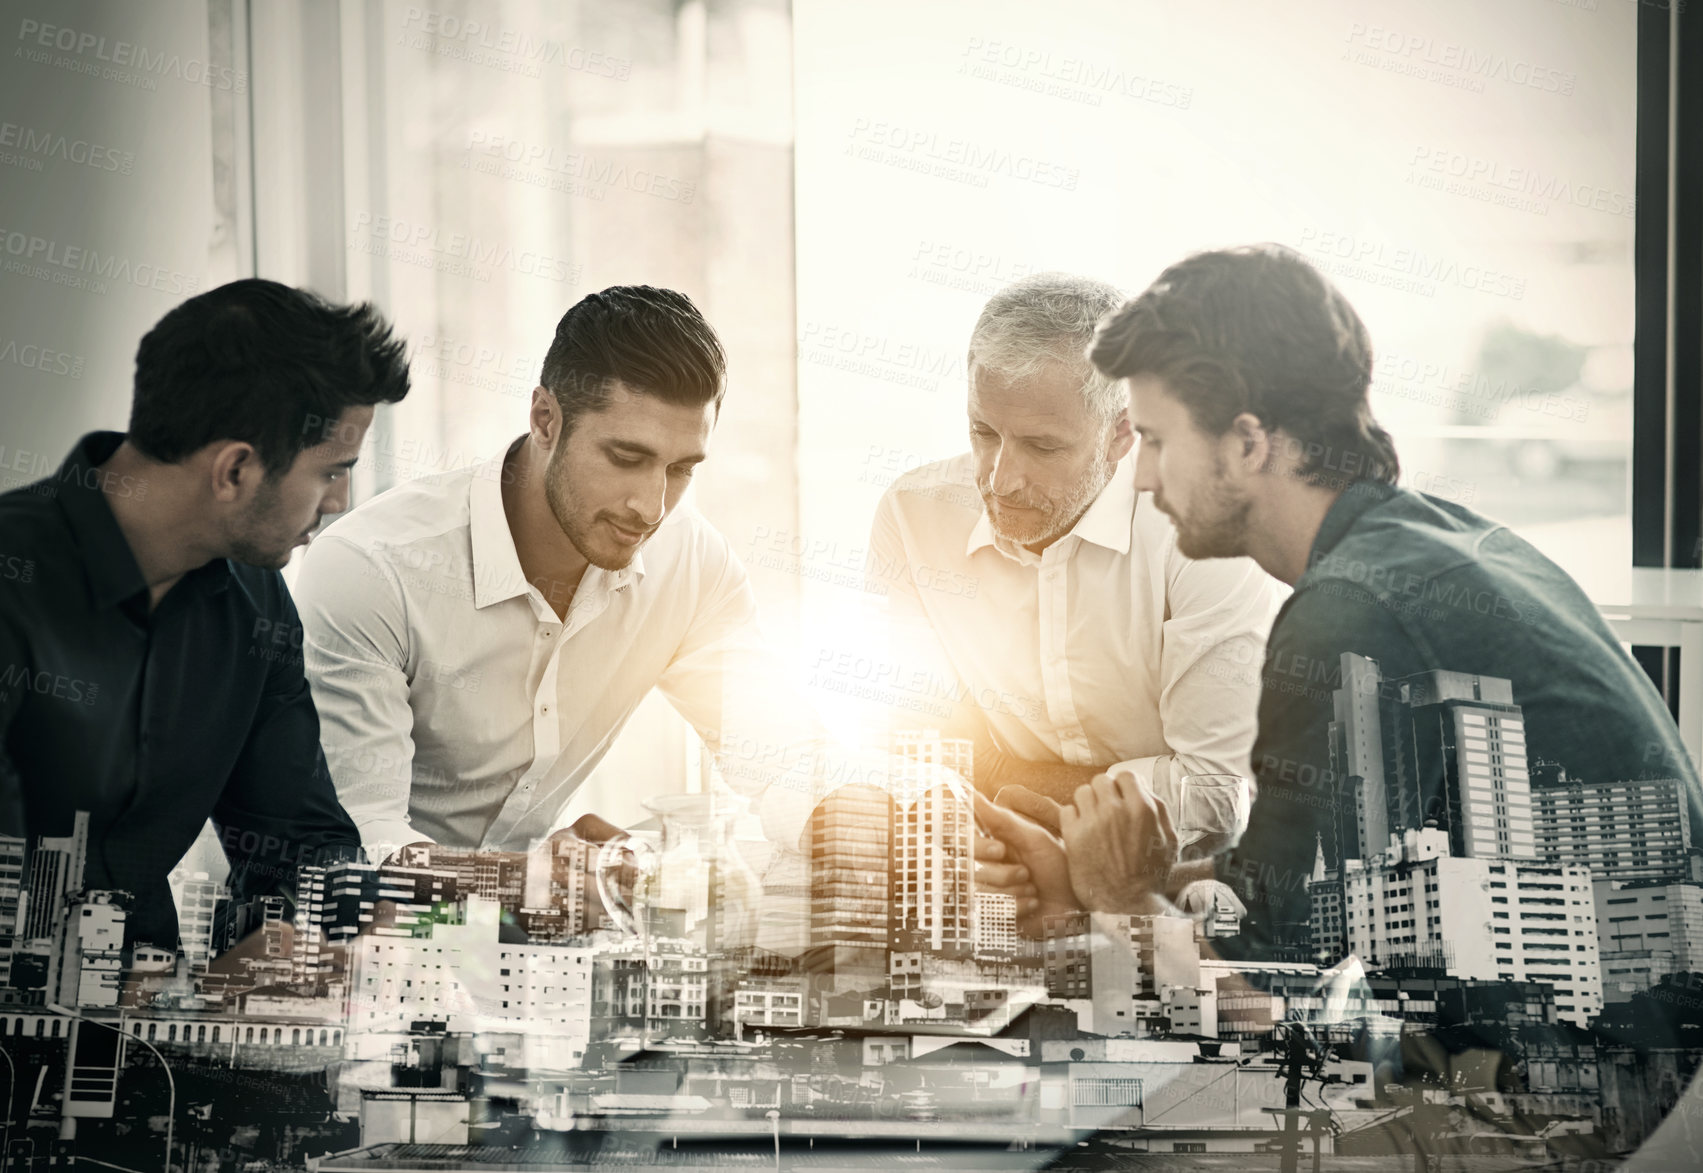 Buy stock photo Cropped shot of a group of businessmen having a meeting around a table in an office superimposed over a city background